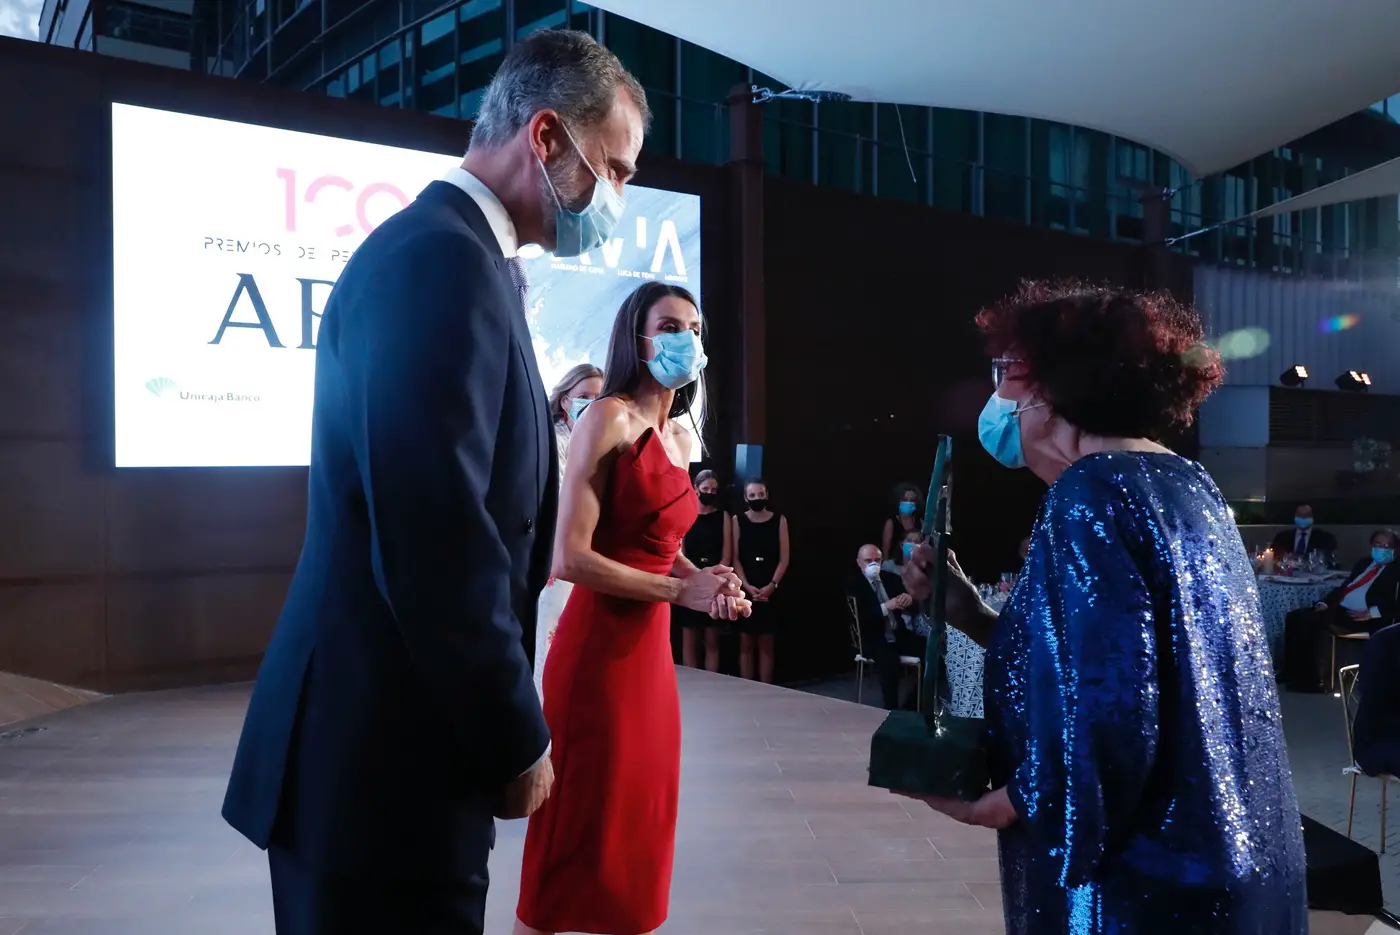 King Felipe and Queen Letizia of Spain presented ABC Journalism Awards